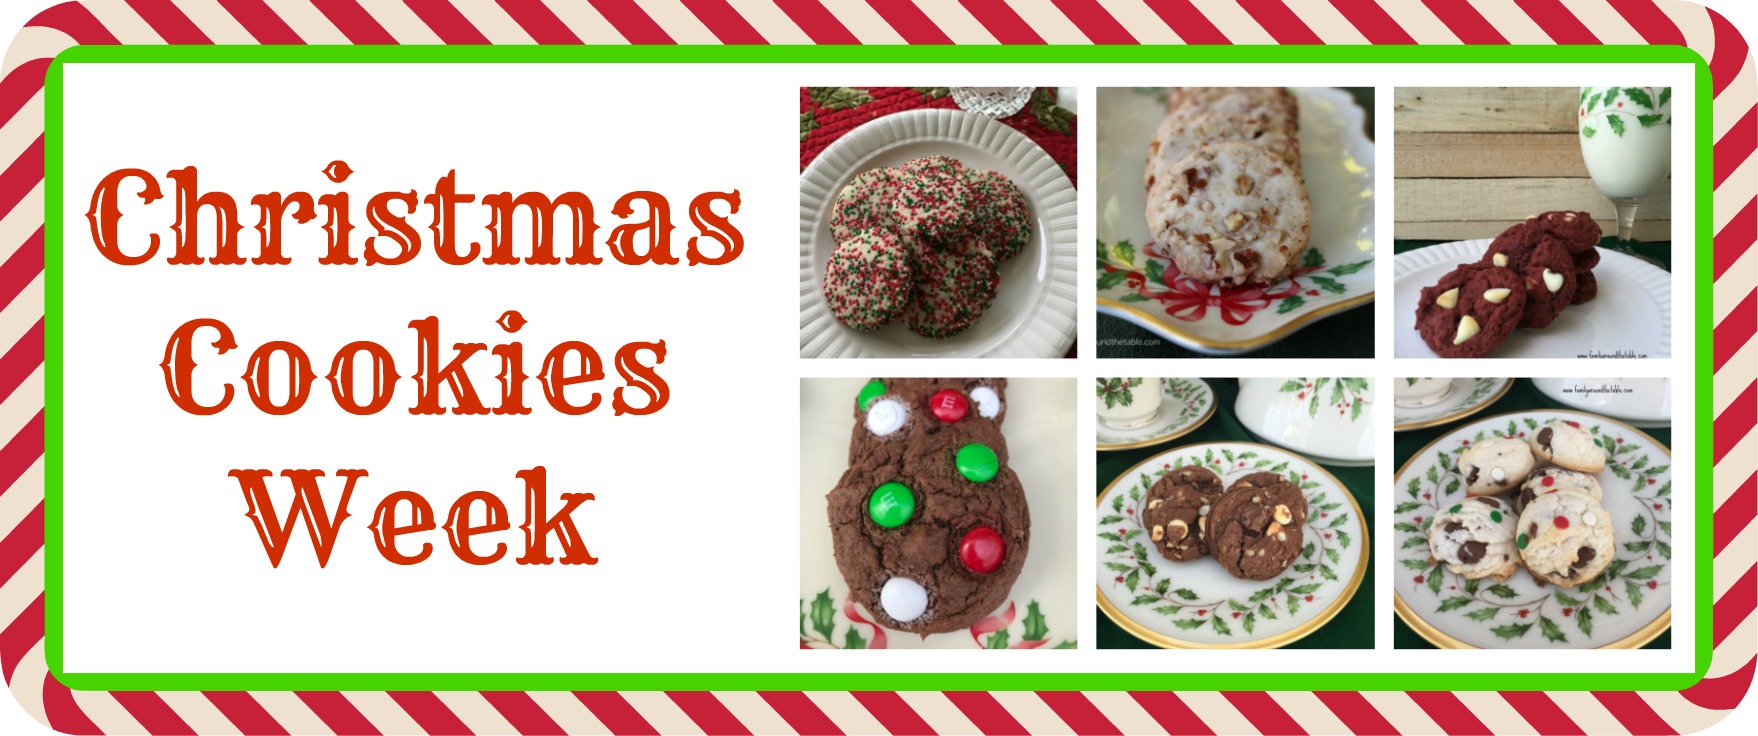 collage of cookies with text overlay "christmas cookies week"